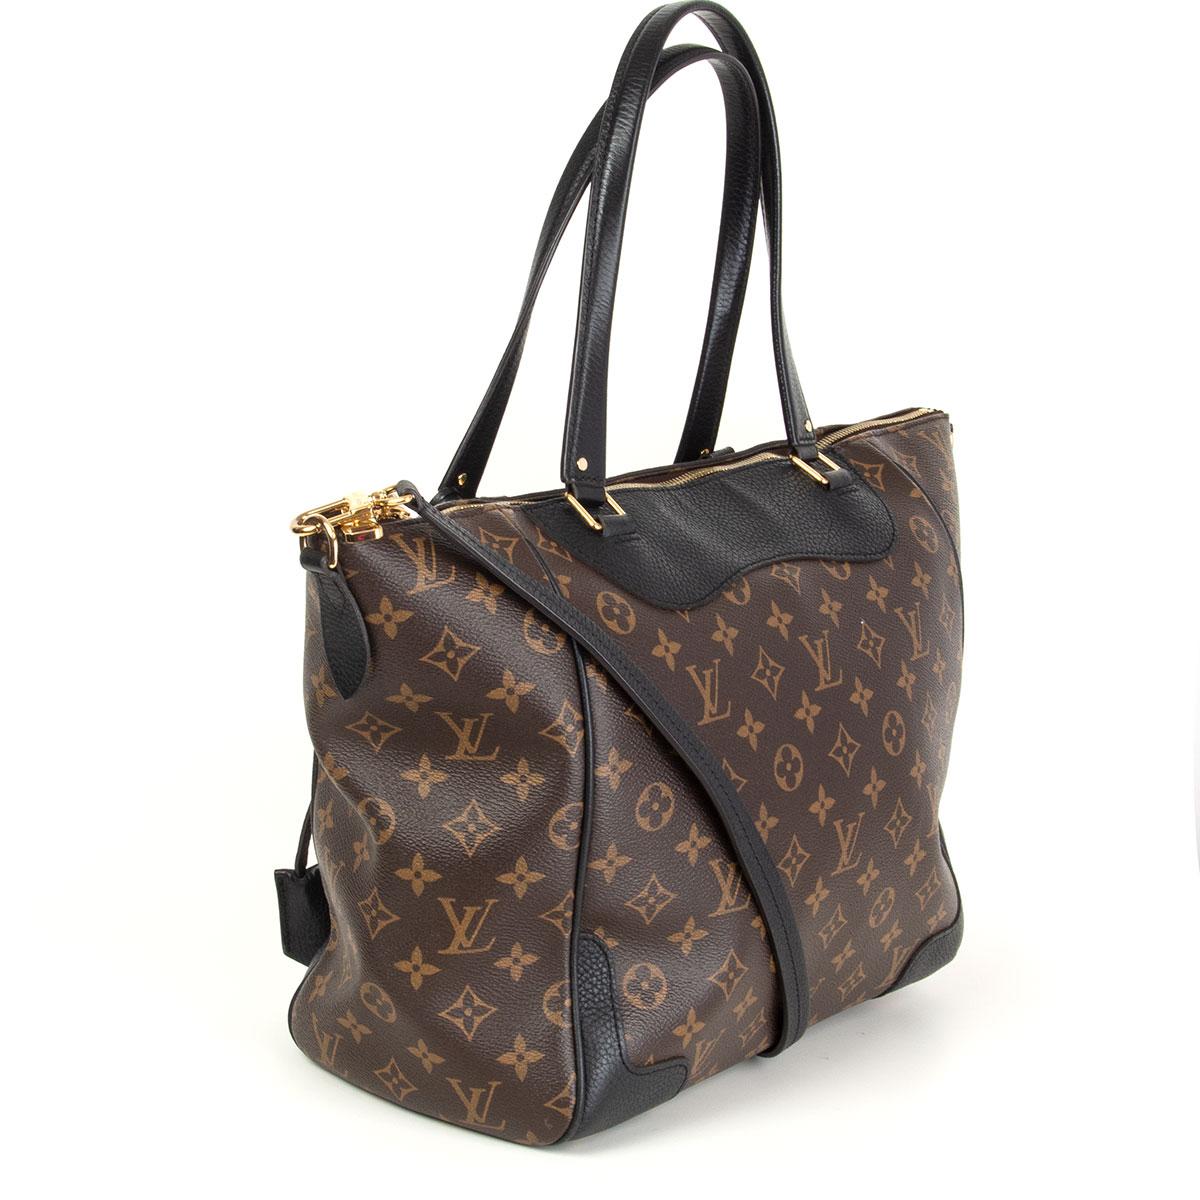 Louis Vuitton 'Estrela MM' shoulder bag in brown and ebene monogram canvas with black grained calfskin edges, trimmings and handles. Comes with a adjustable and detachable shoulder-strap, lock and clochette. Opens with a zipper on top and is lined